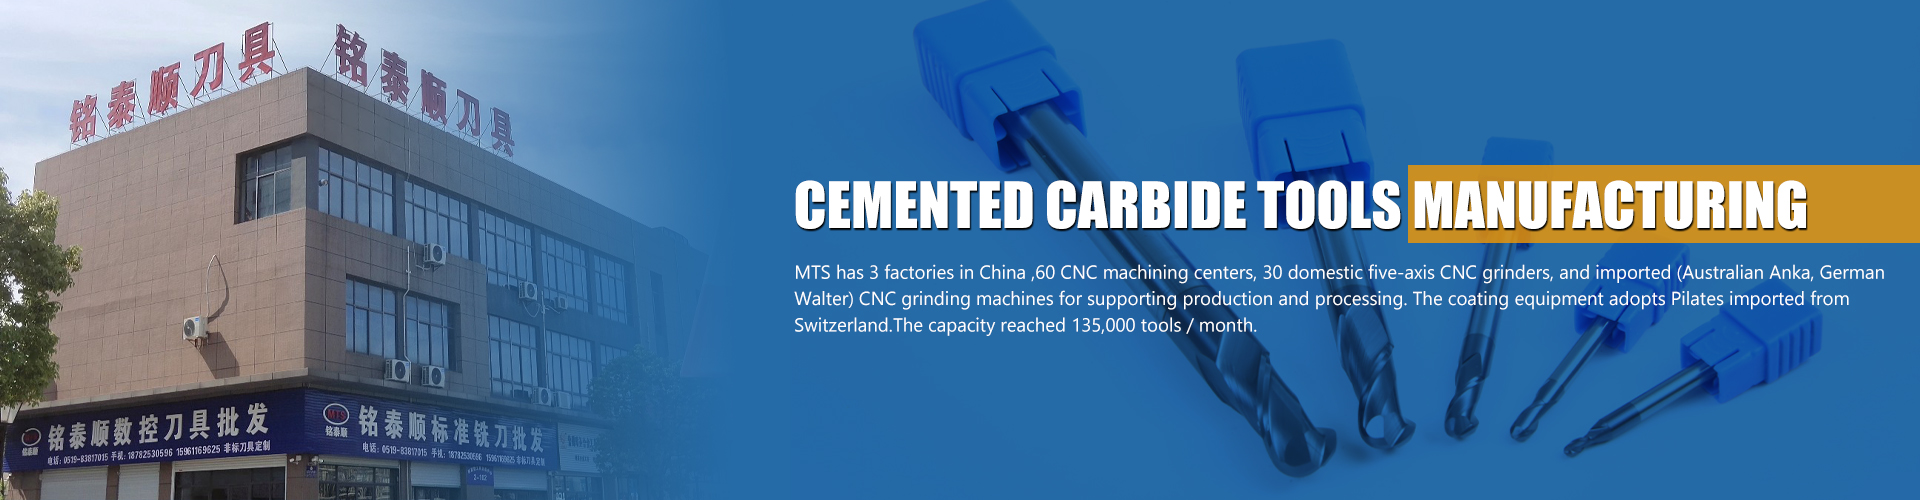 Cemented Carbide Tools China Manufactrer 01